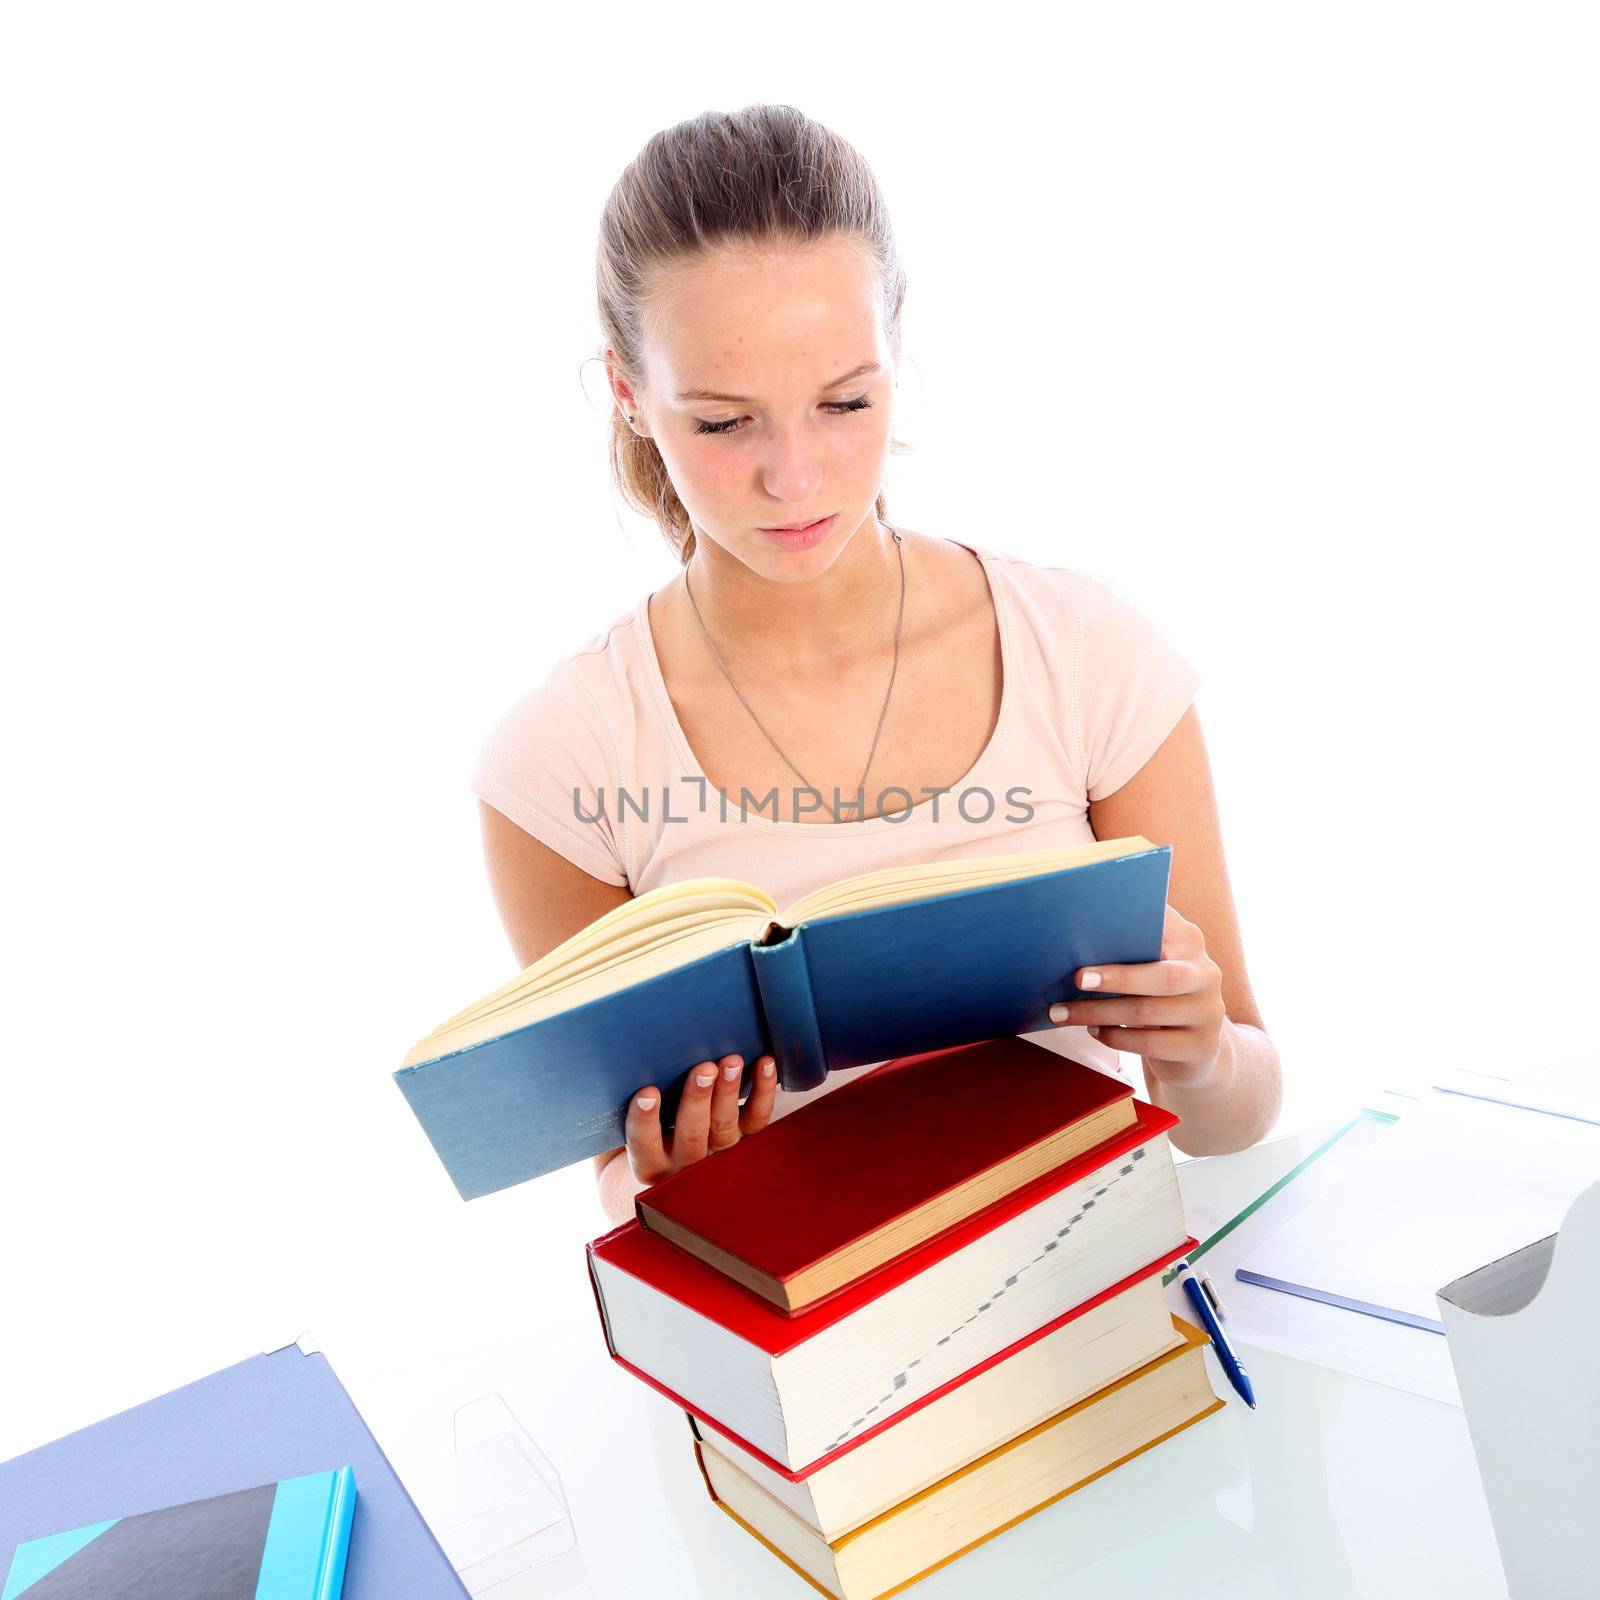 Dedicated female student studying  by Farina6000